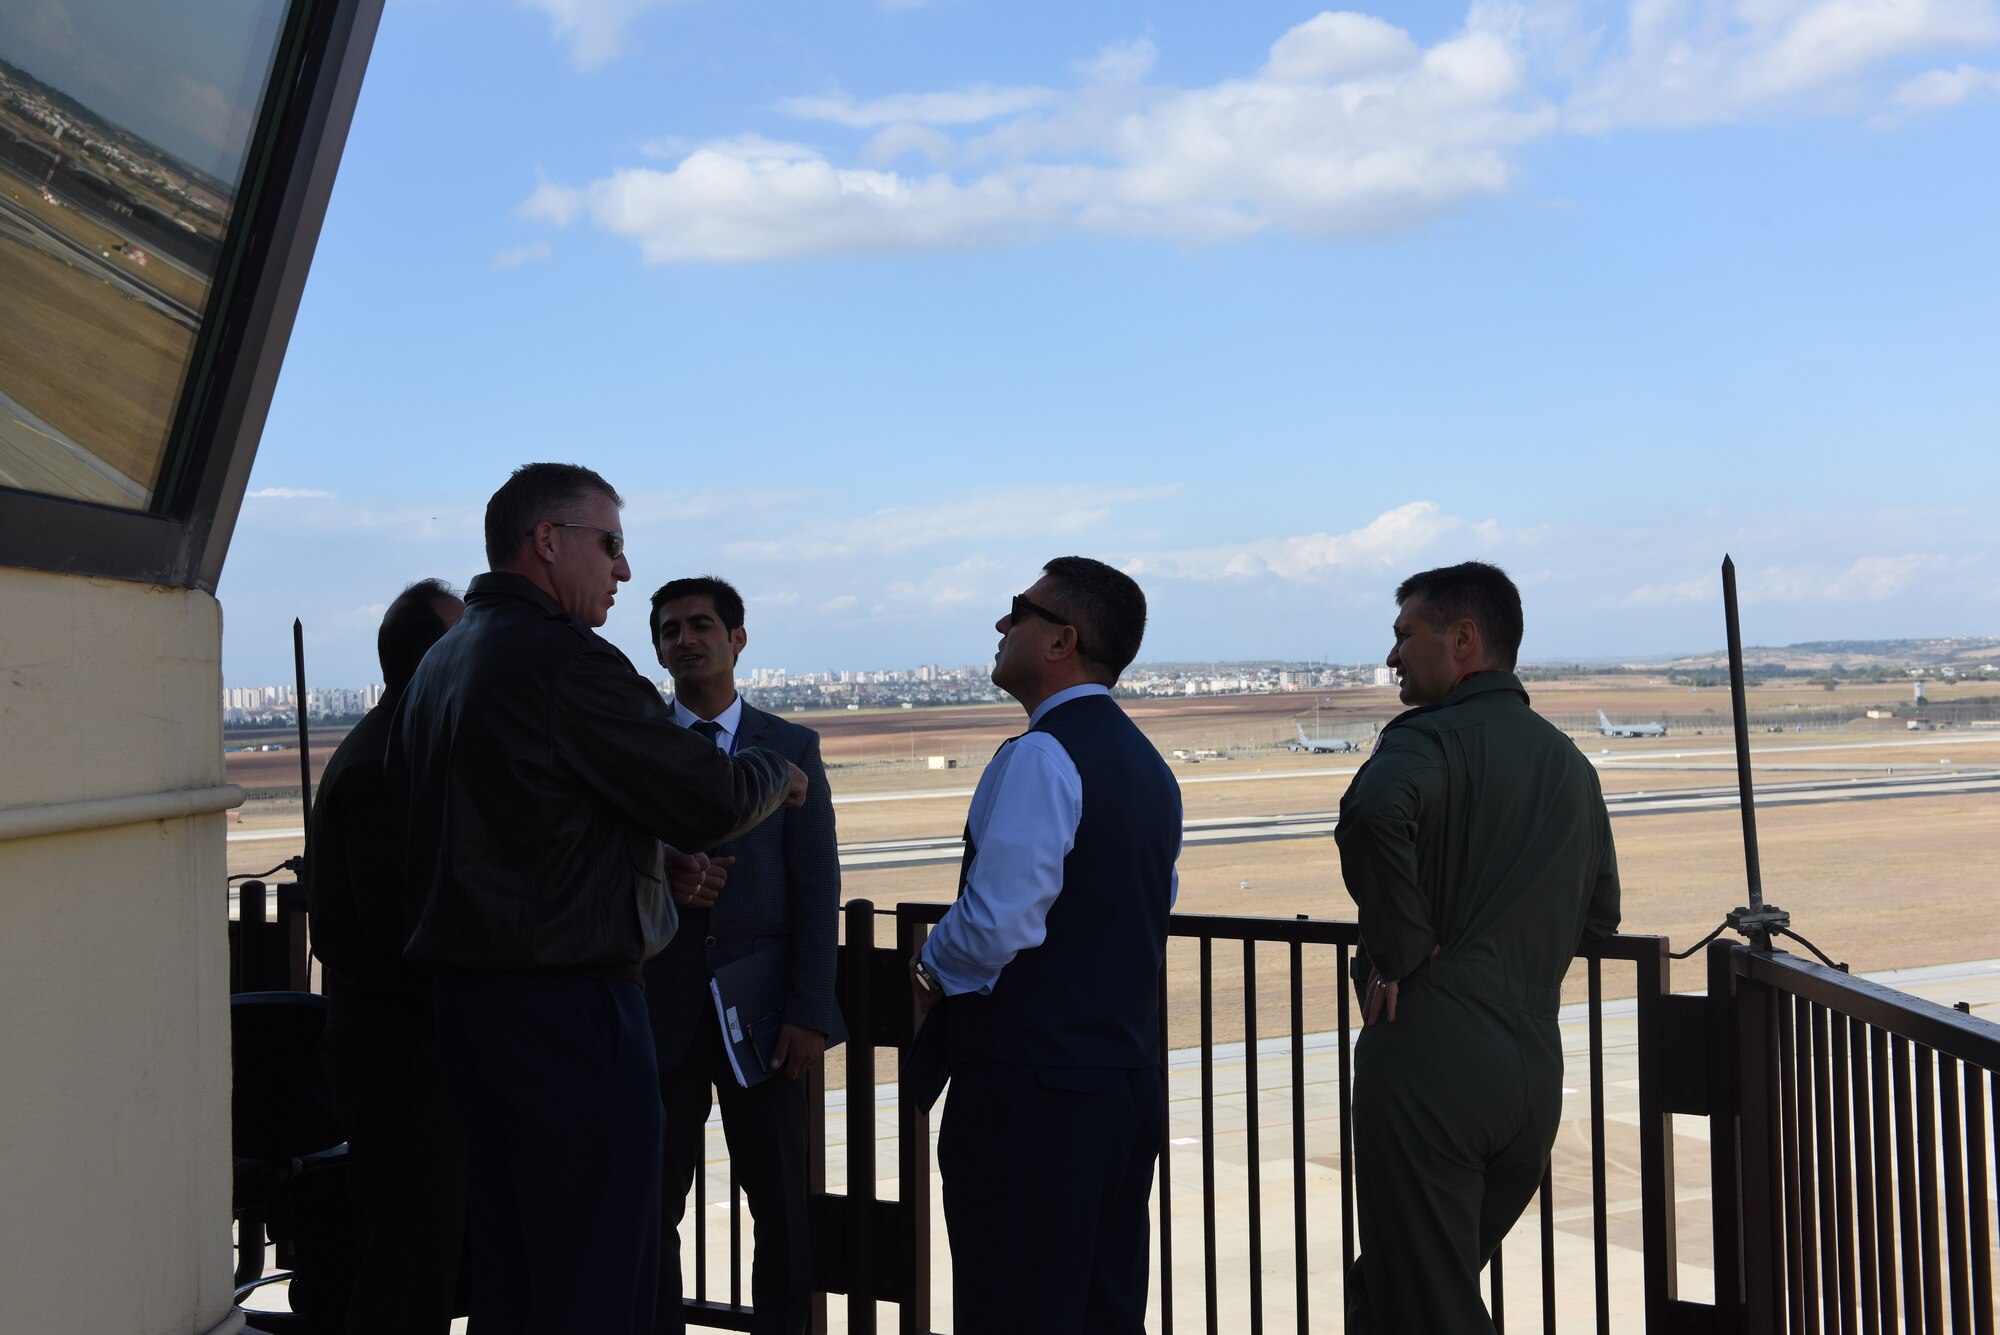 Col. David Eaglin, 39th Air Base Wing commander, talks with Brig. Gen. Necati Gunduz and Brig. Gen. Ismail Gunaydin at the tower during the Defense and Economic Cooperation Agreement inspection at Incirlik Air Base, Turkey, Oct. 30, 2017.